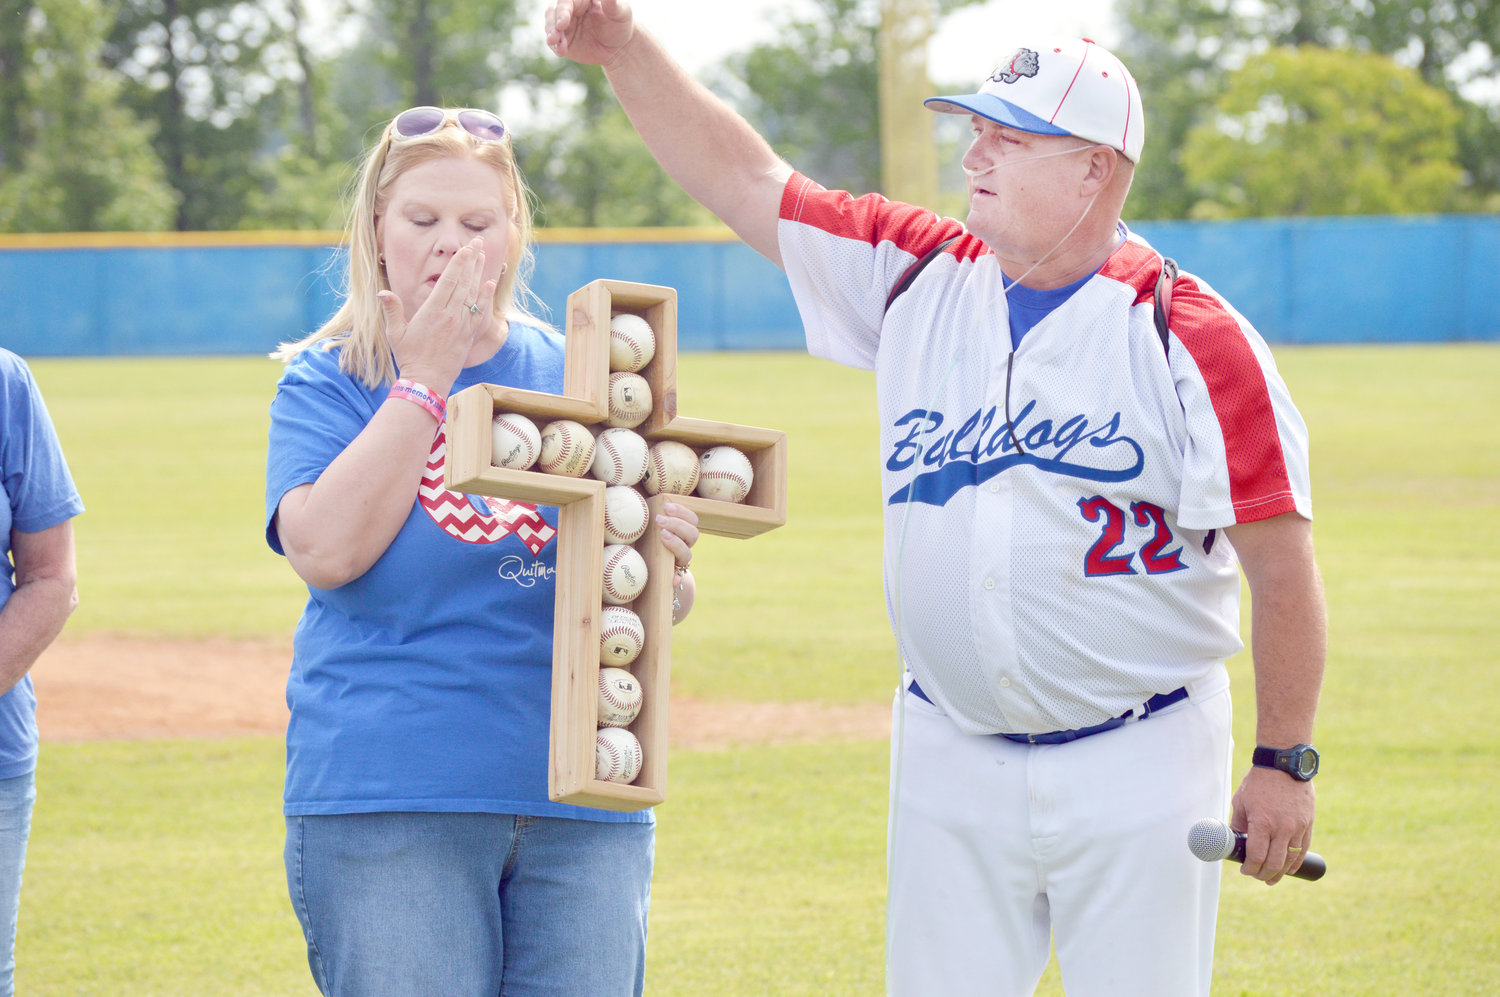 Quitman baseball coach Hayland Hardy presented a cross made of baseballs to Melissa Coats in honor of her son, the late Jacob Coats prior to last week’s Mineola game. (Monitor photo by Larry Tucker)